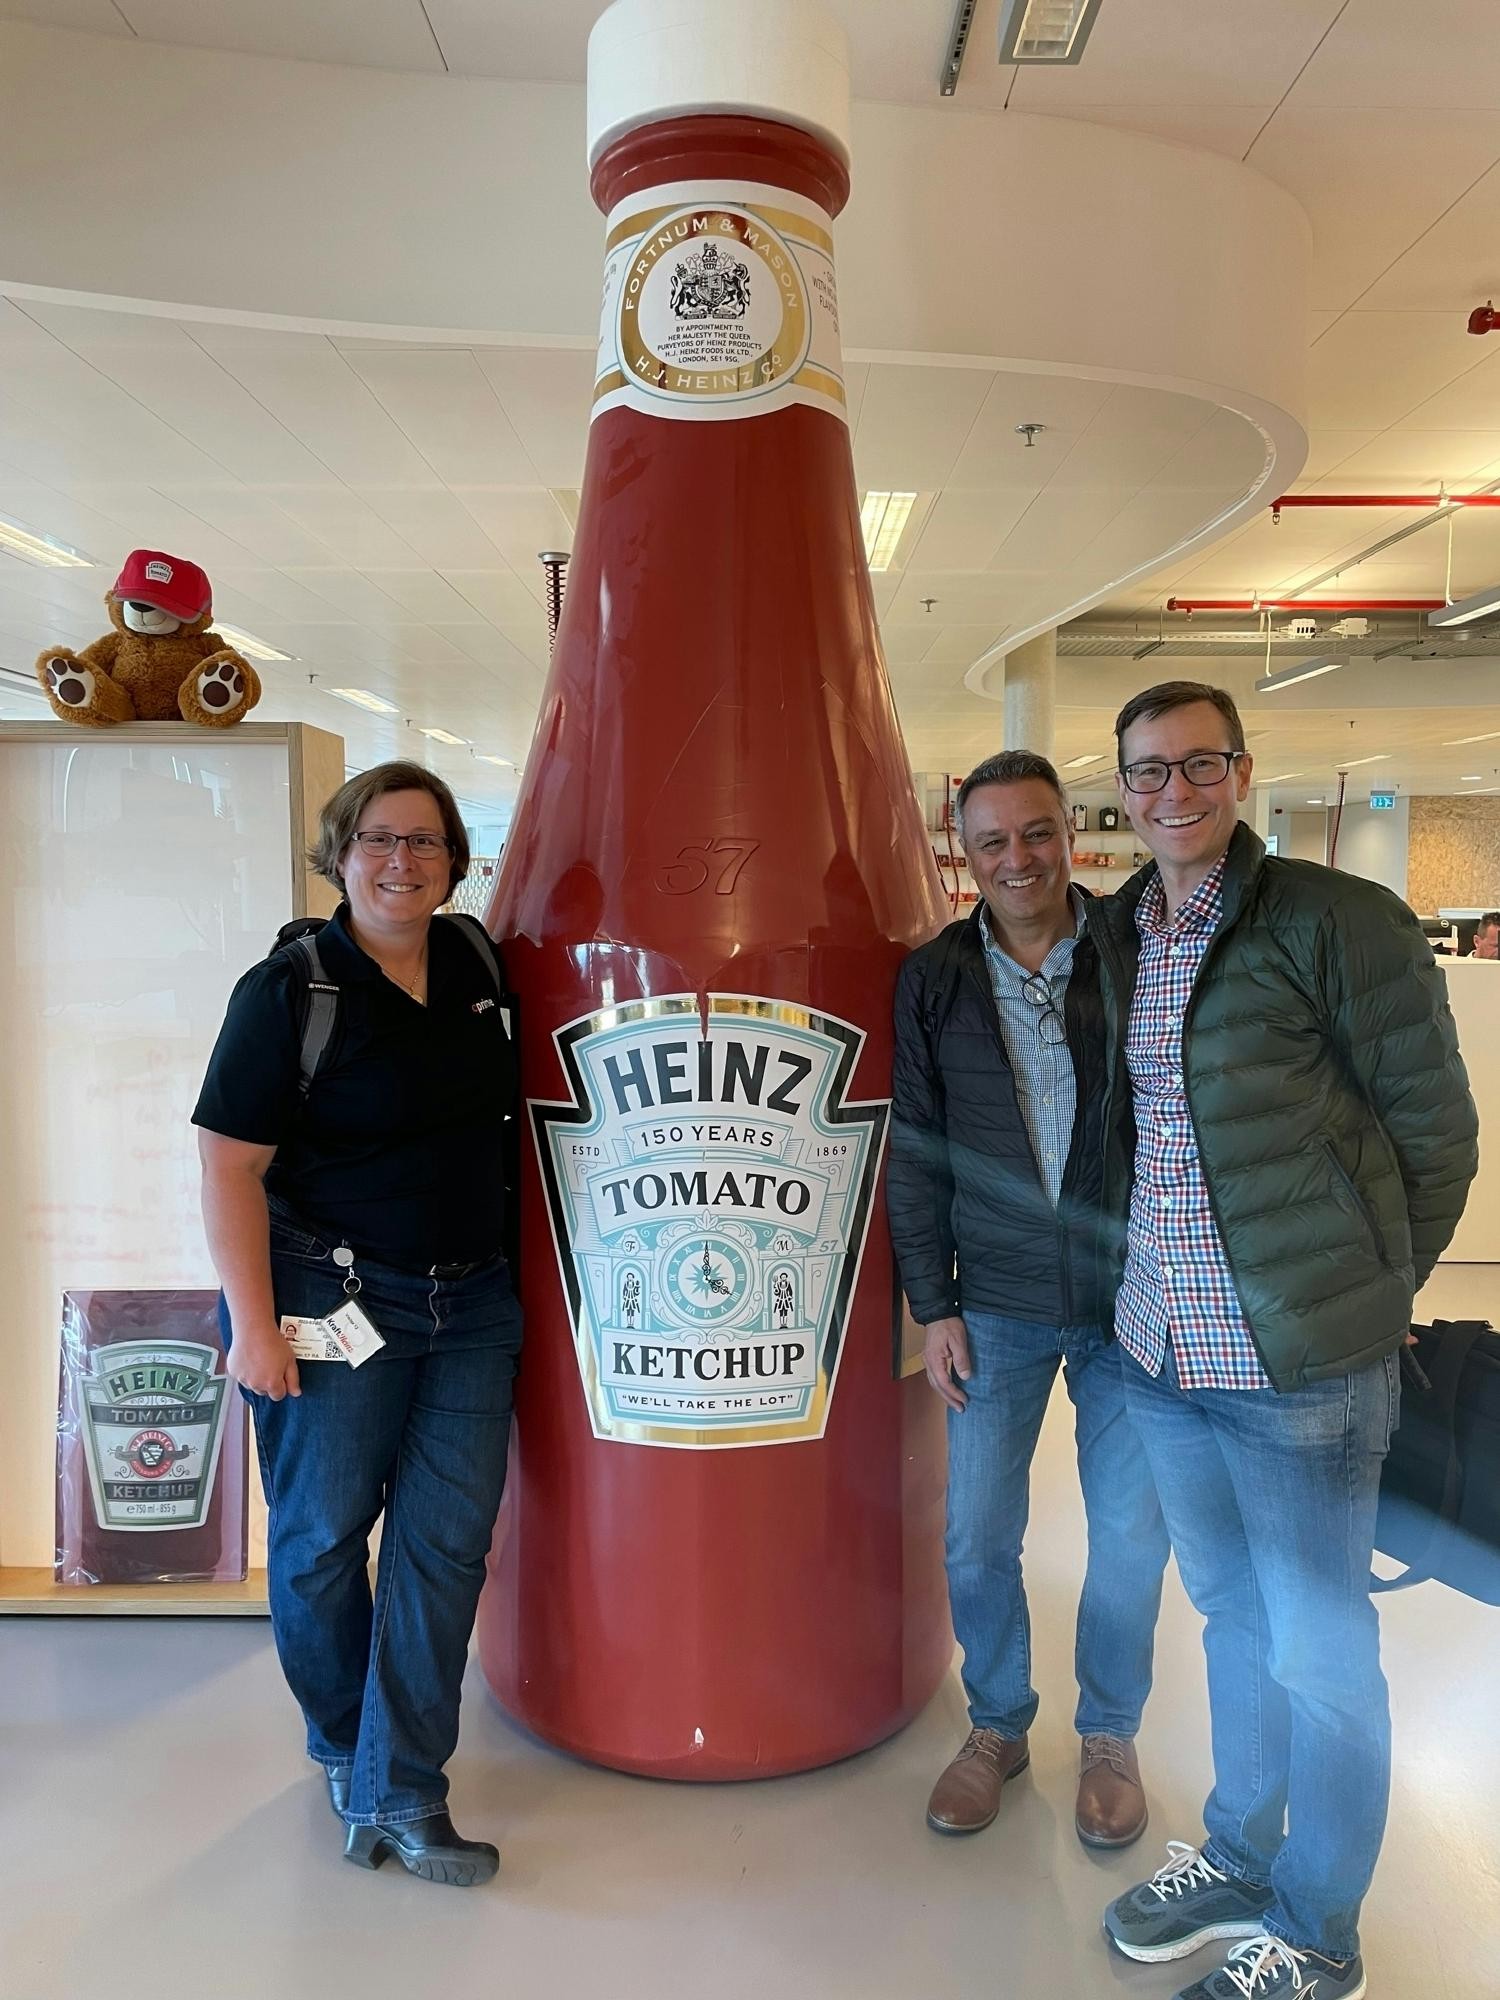 Big Heinz ketchup.  Why wouldn't you take a picture with one?